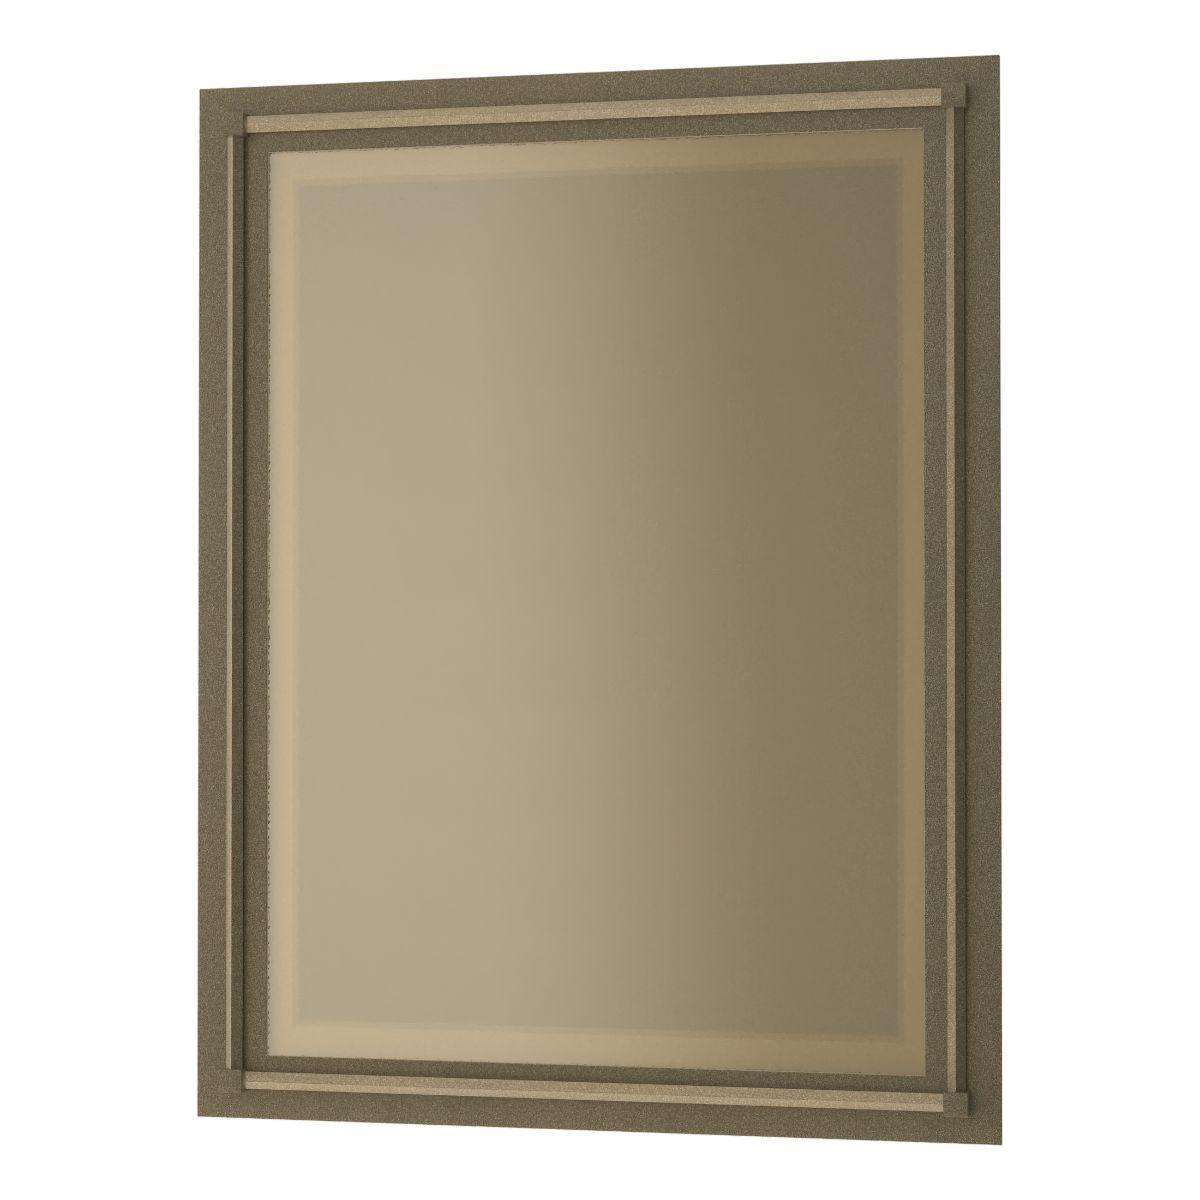 Rook Beveled Oval 22 In. X 32 In. Wall Mirror